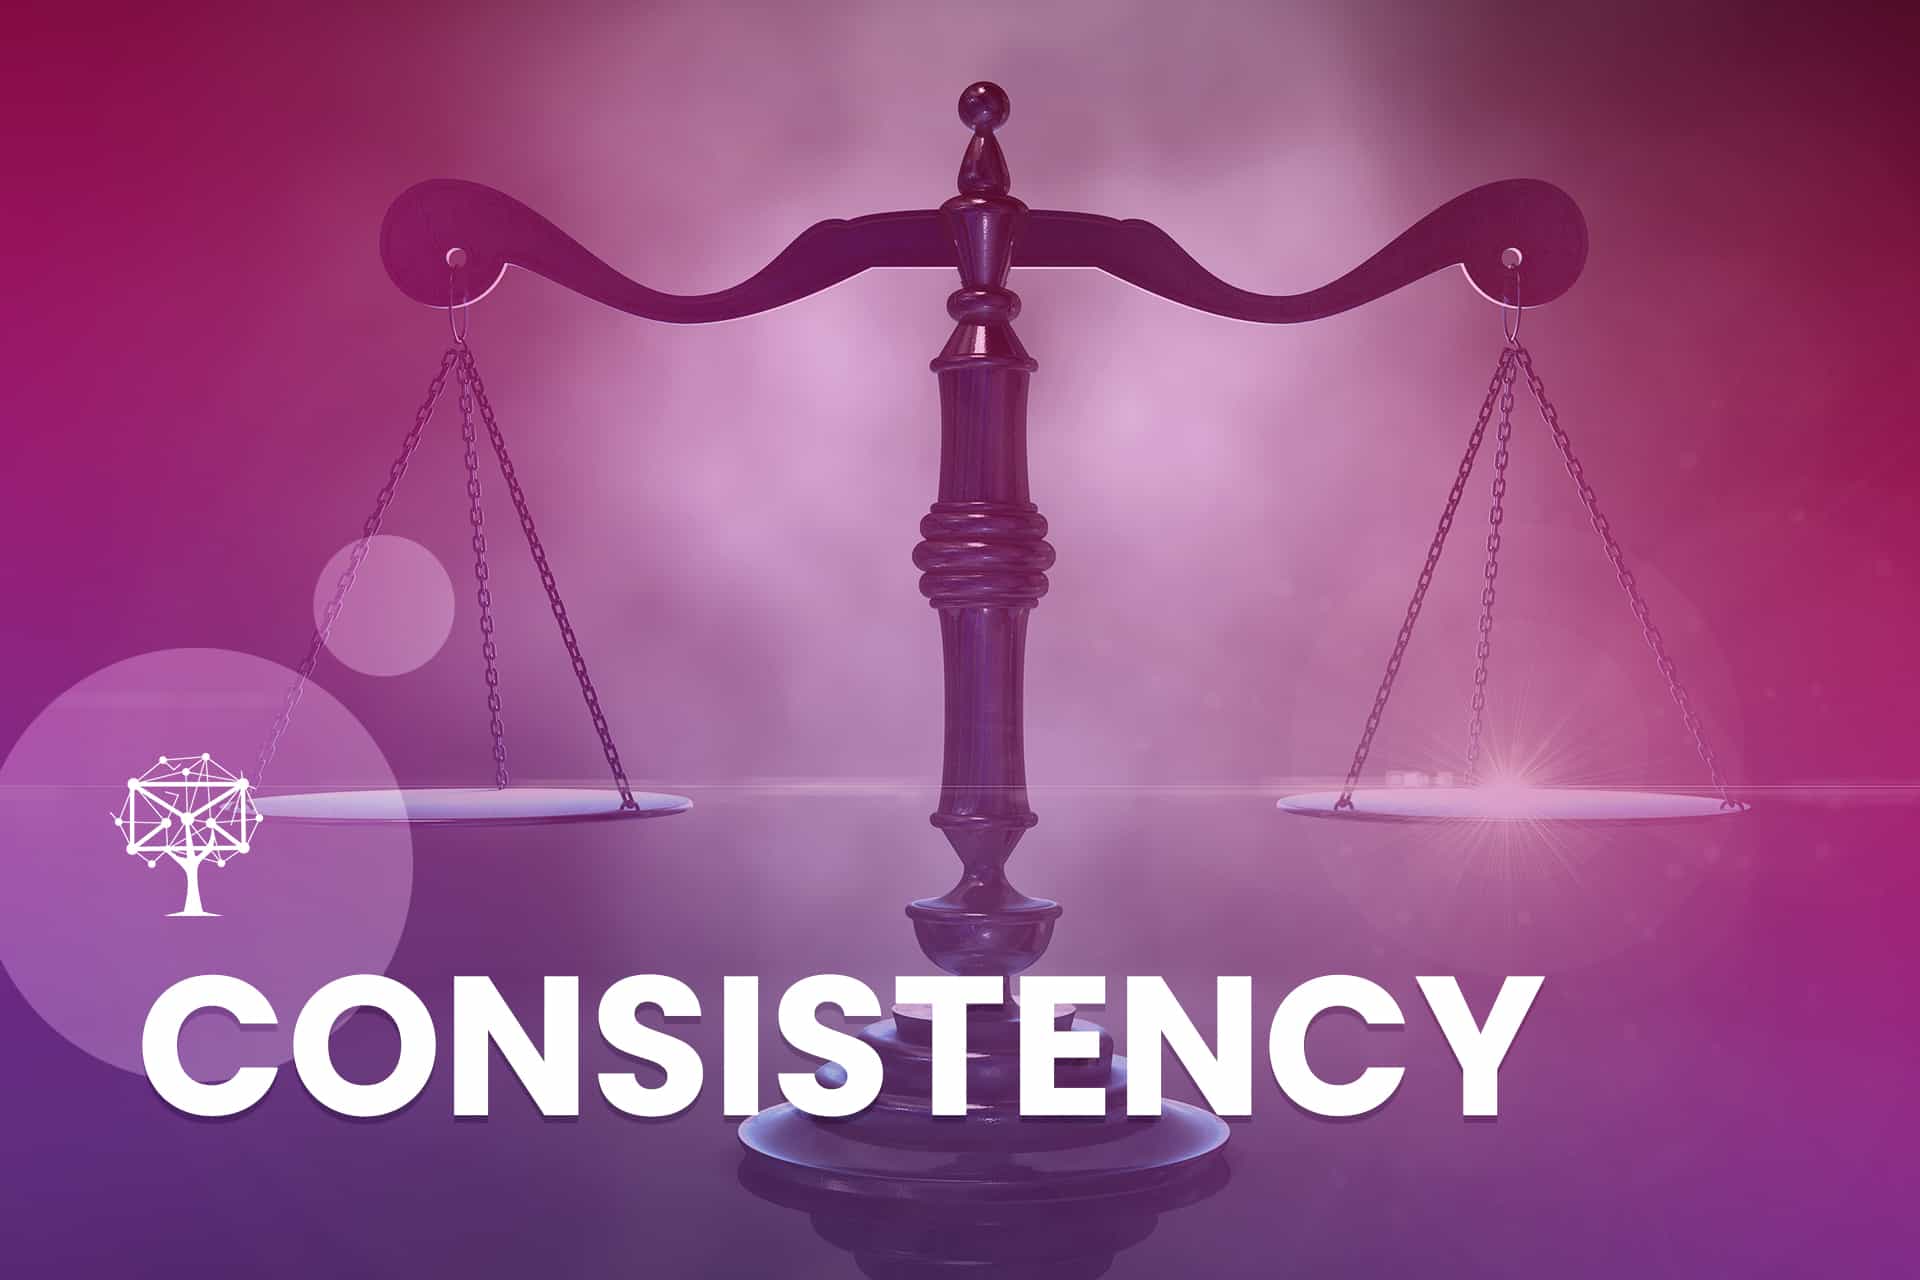 Consistency is a customer service skill